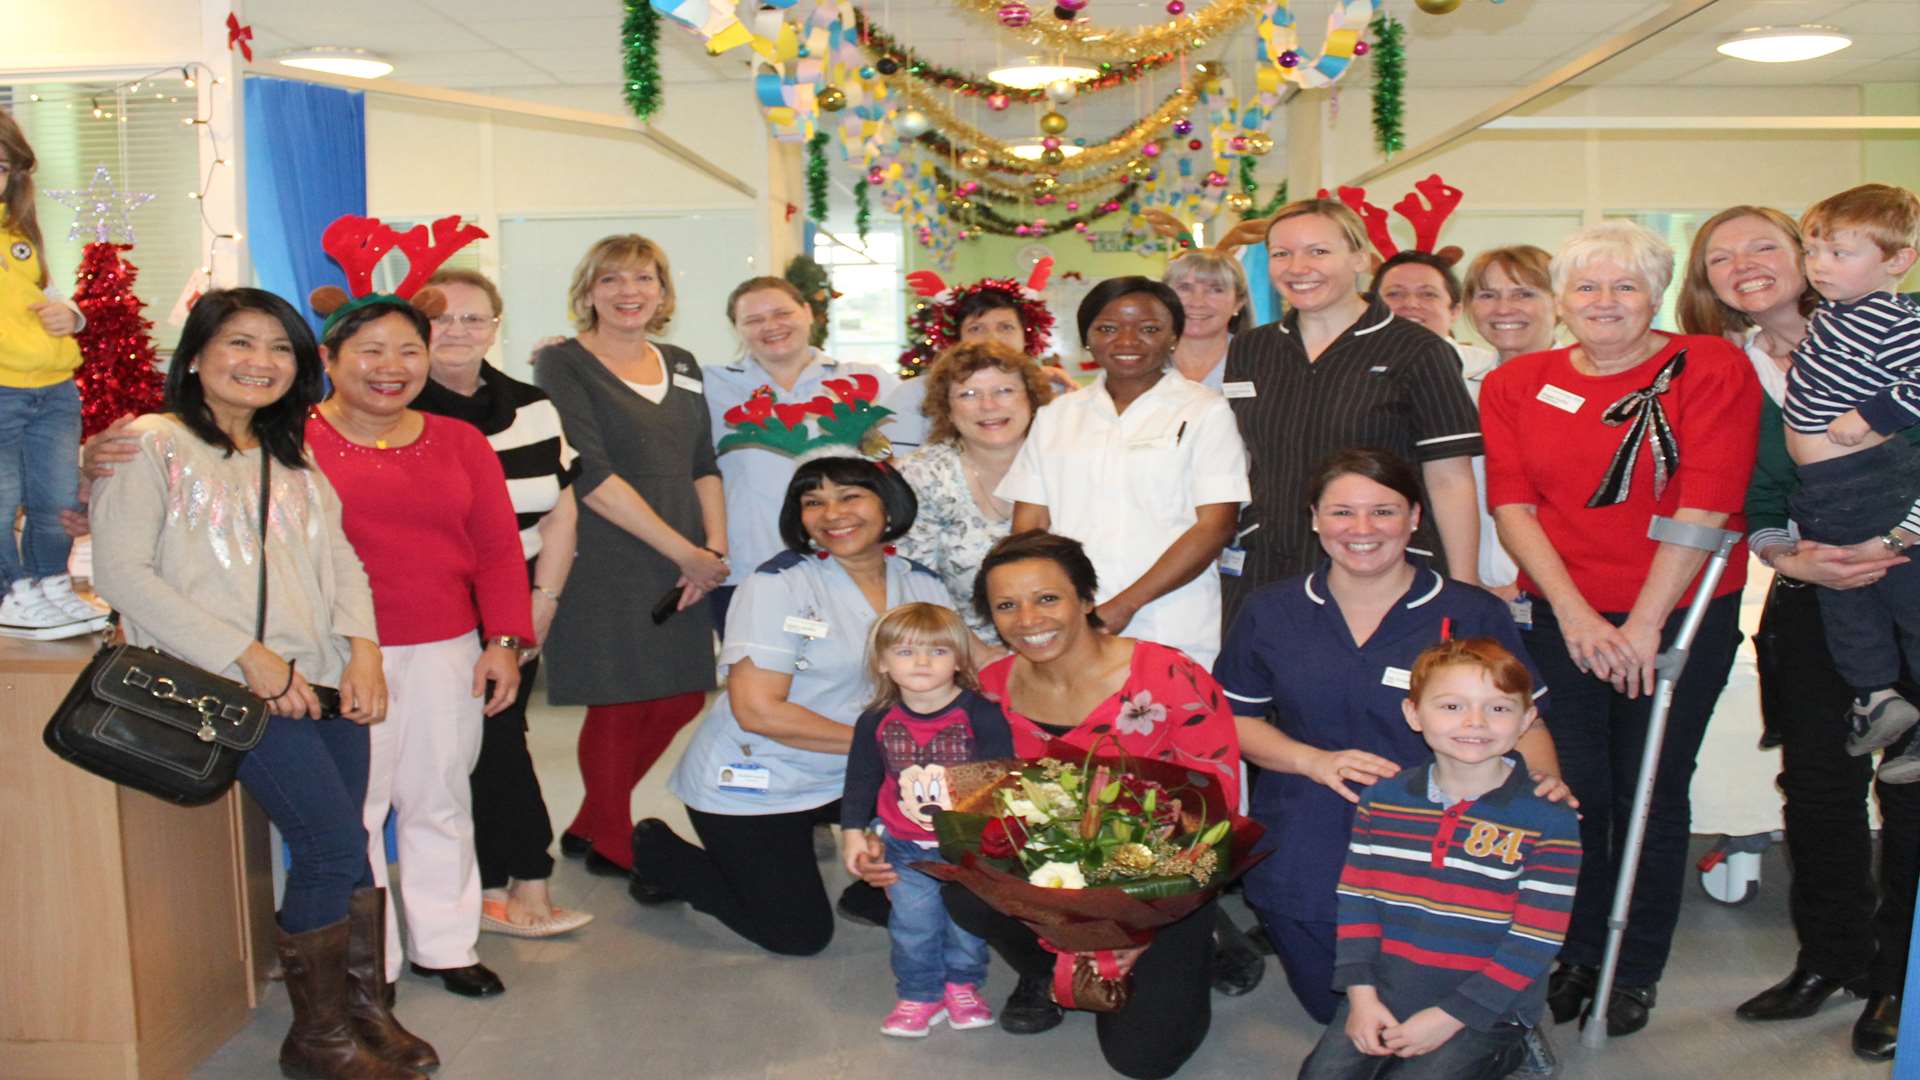 Dame Kelly Holmes joined teams at Sevenoaks Hospital to judge the Christmas decoration competition